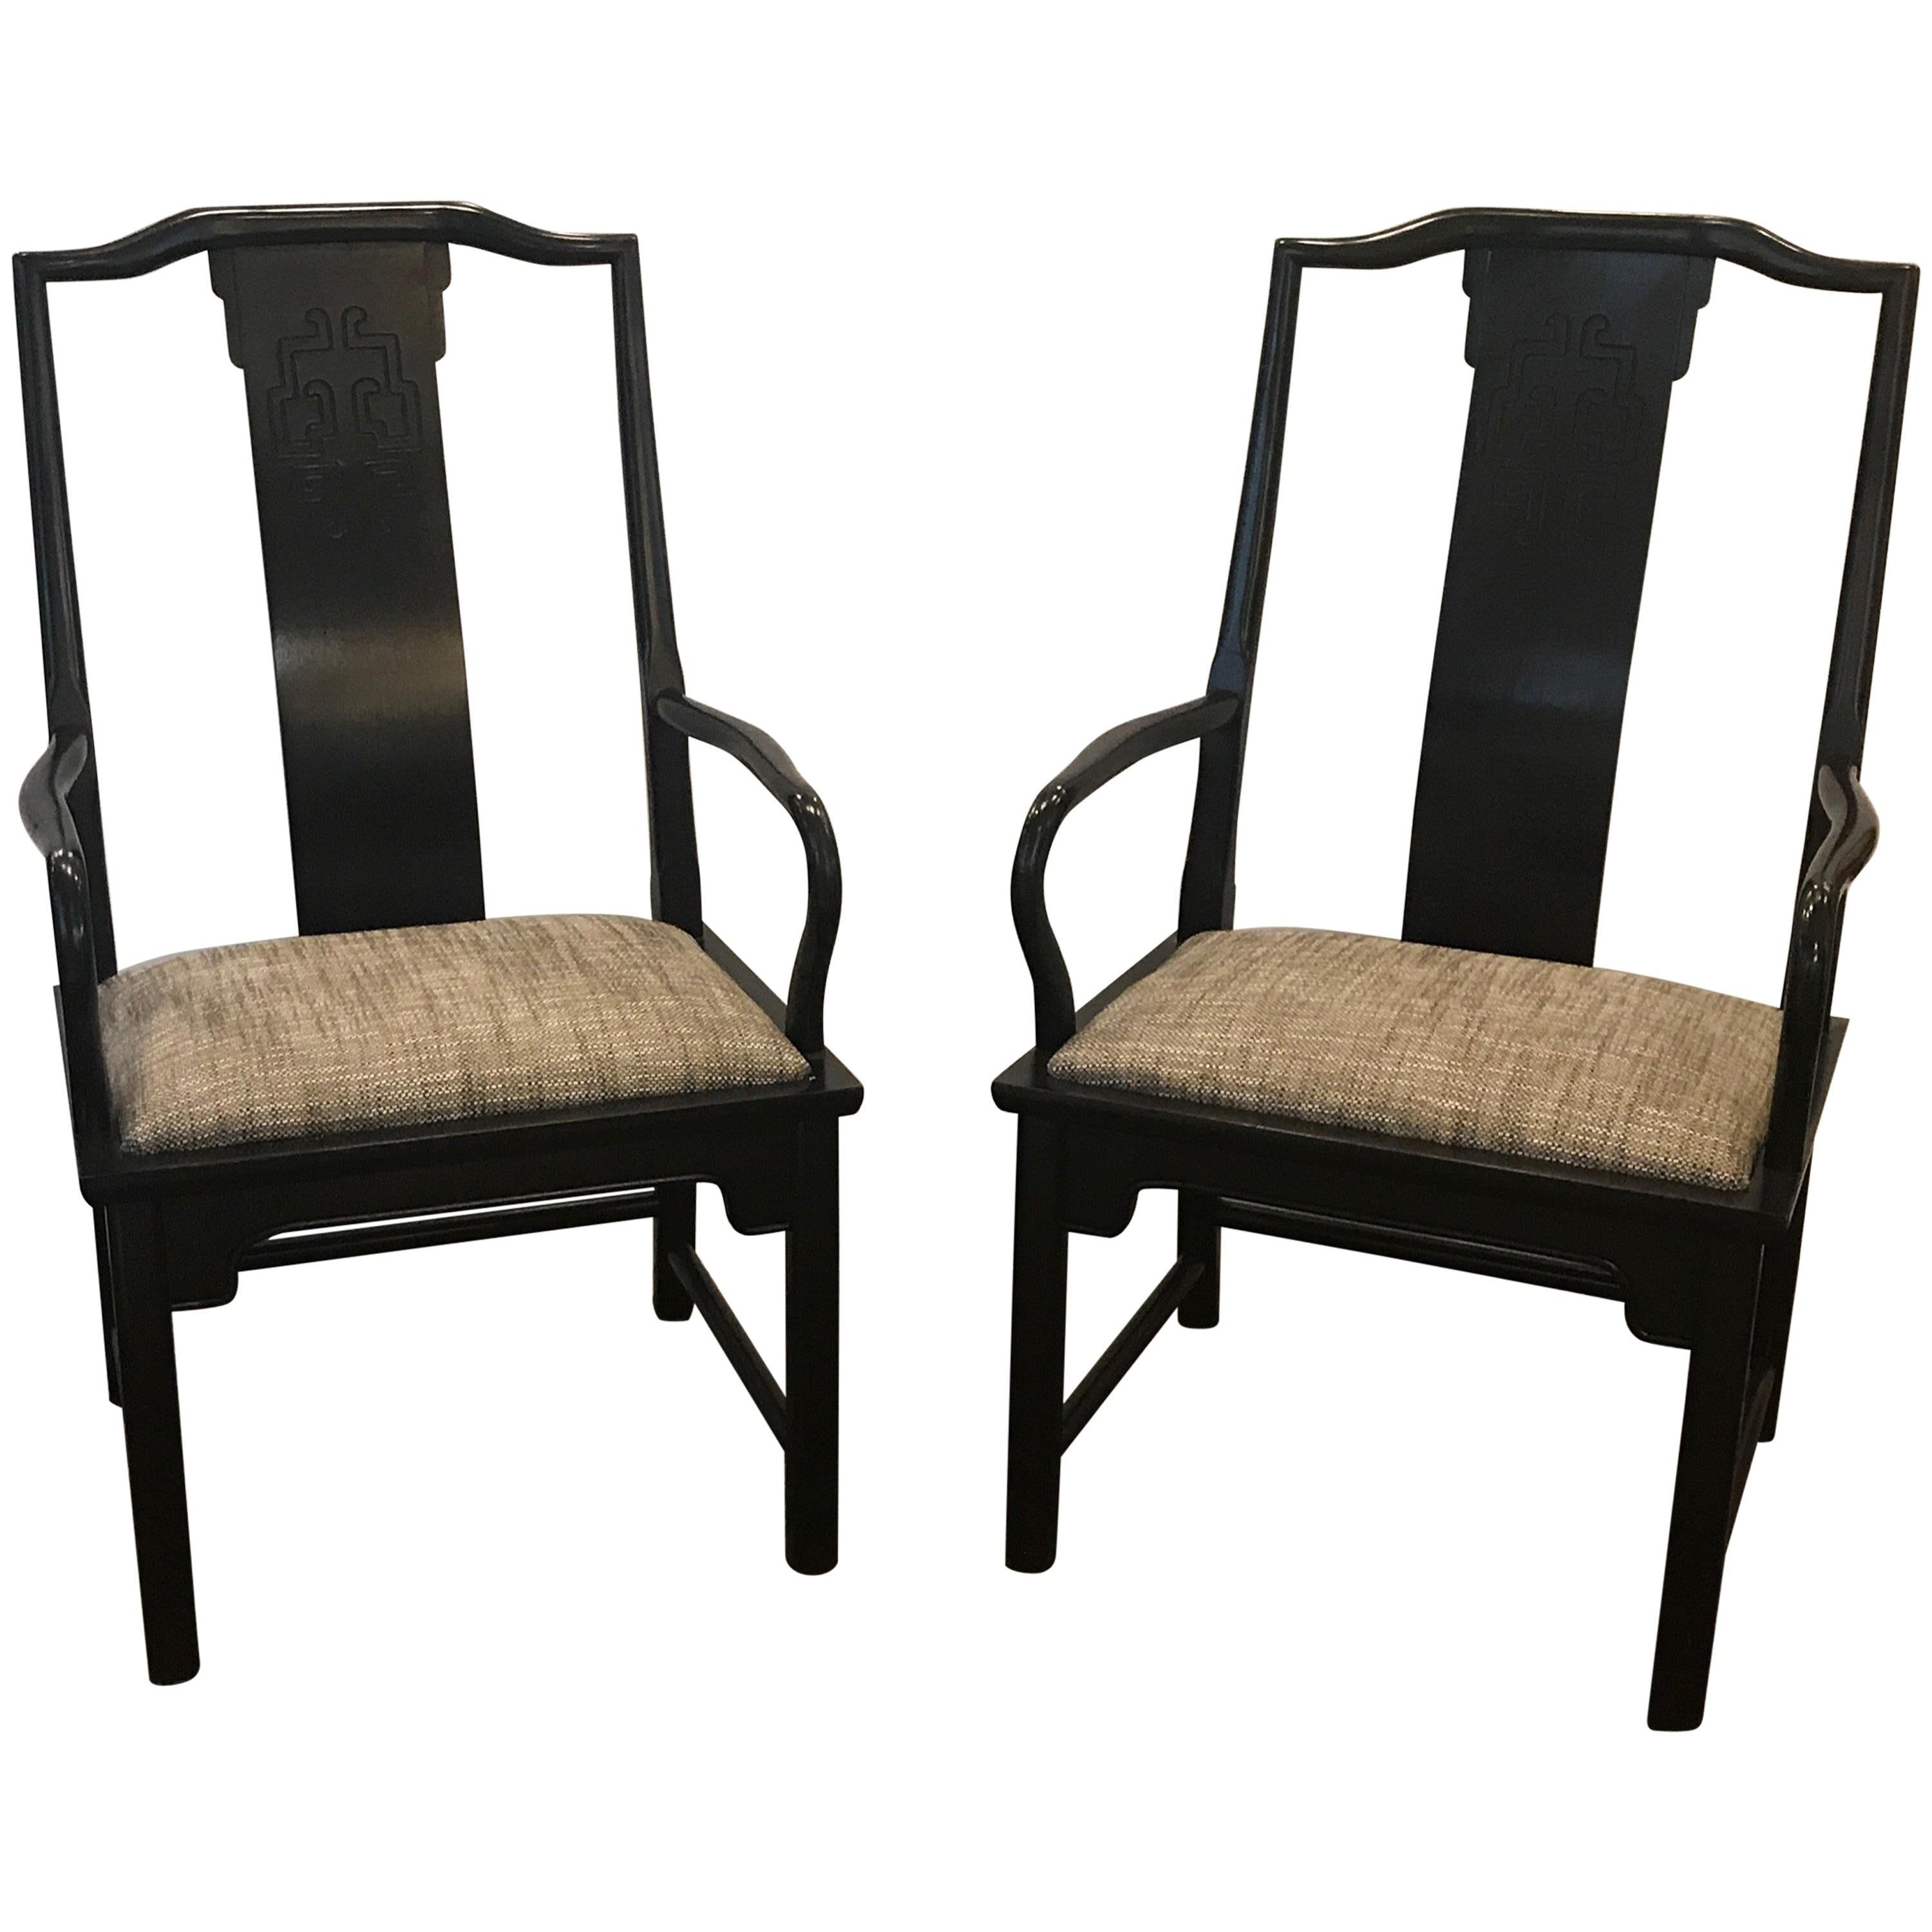 Protein reccomend Asian style accent chairs